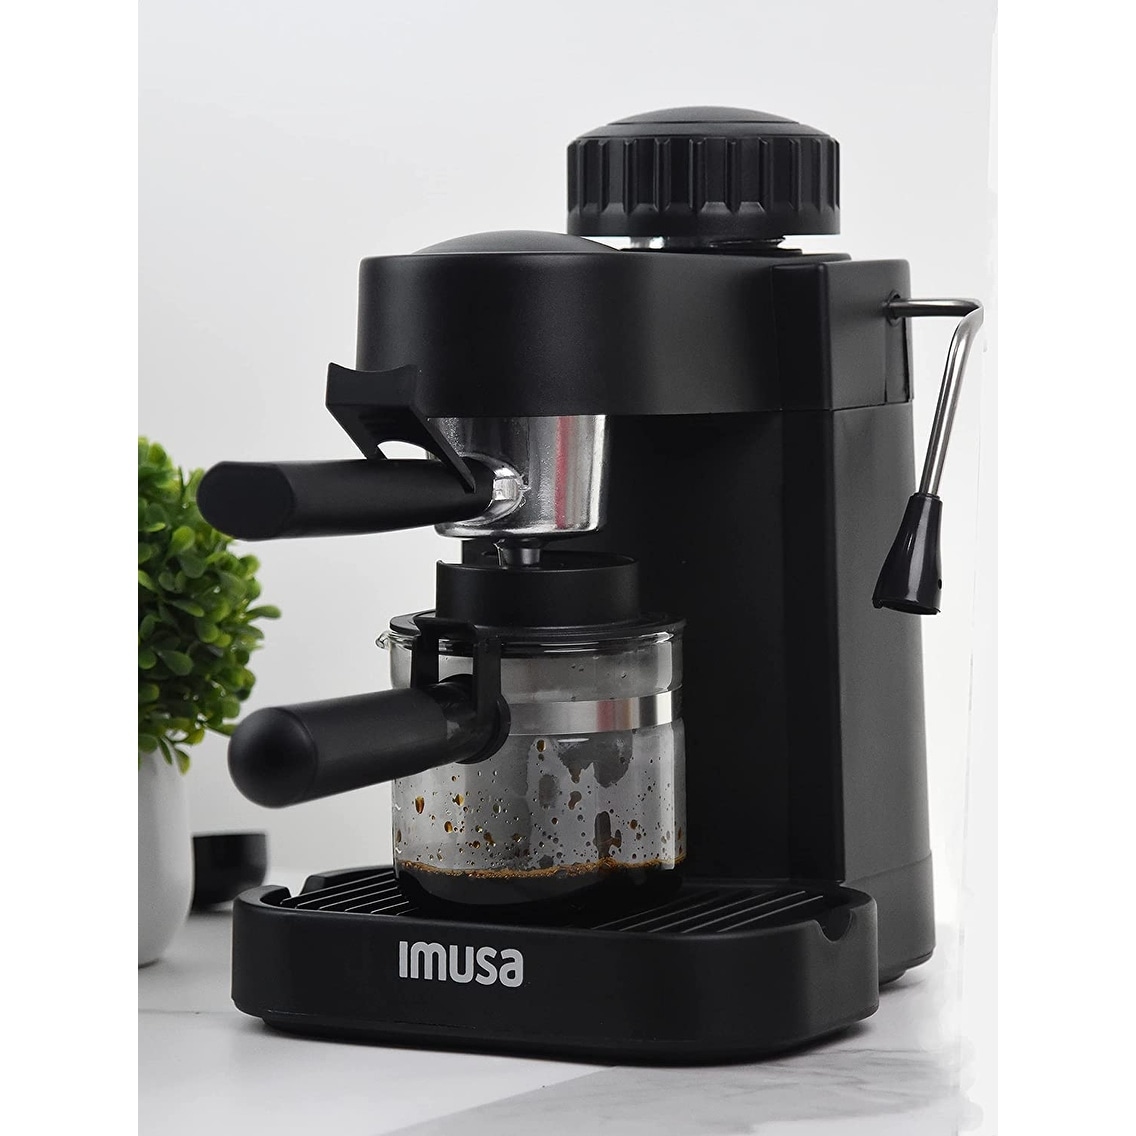 https://ak1.ostkcdn.com/images/products/is/images/direct/ae957e8aa8821ba142c8b6cd019be086b5b65560/IMUSA-4-Cup-Espresso-Cappuccino-Maker.jpg